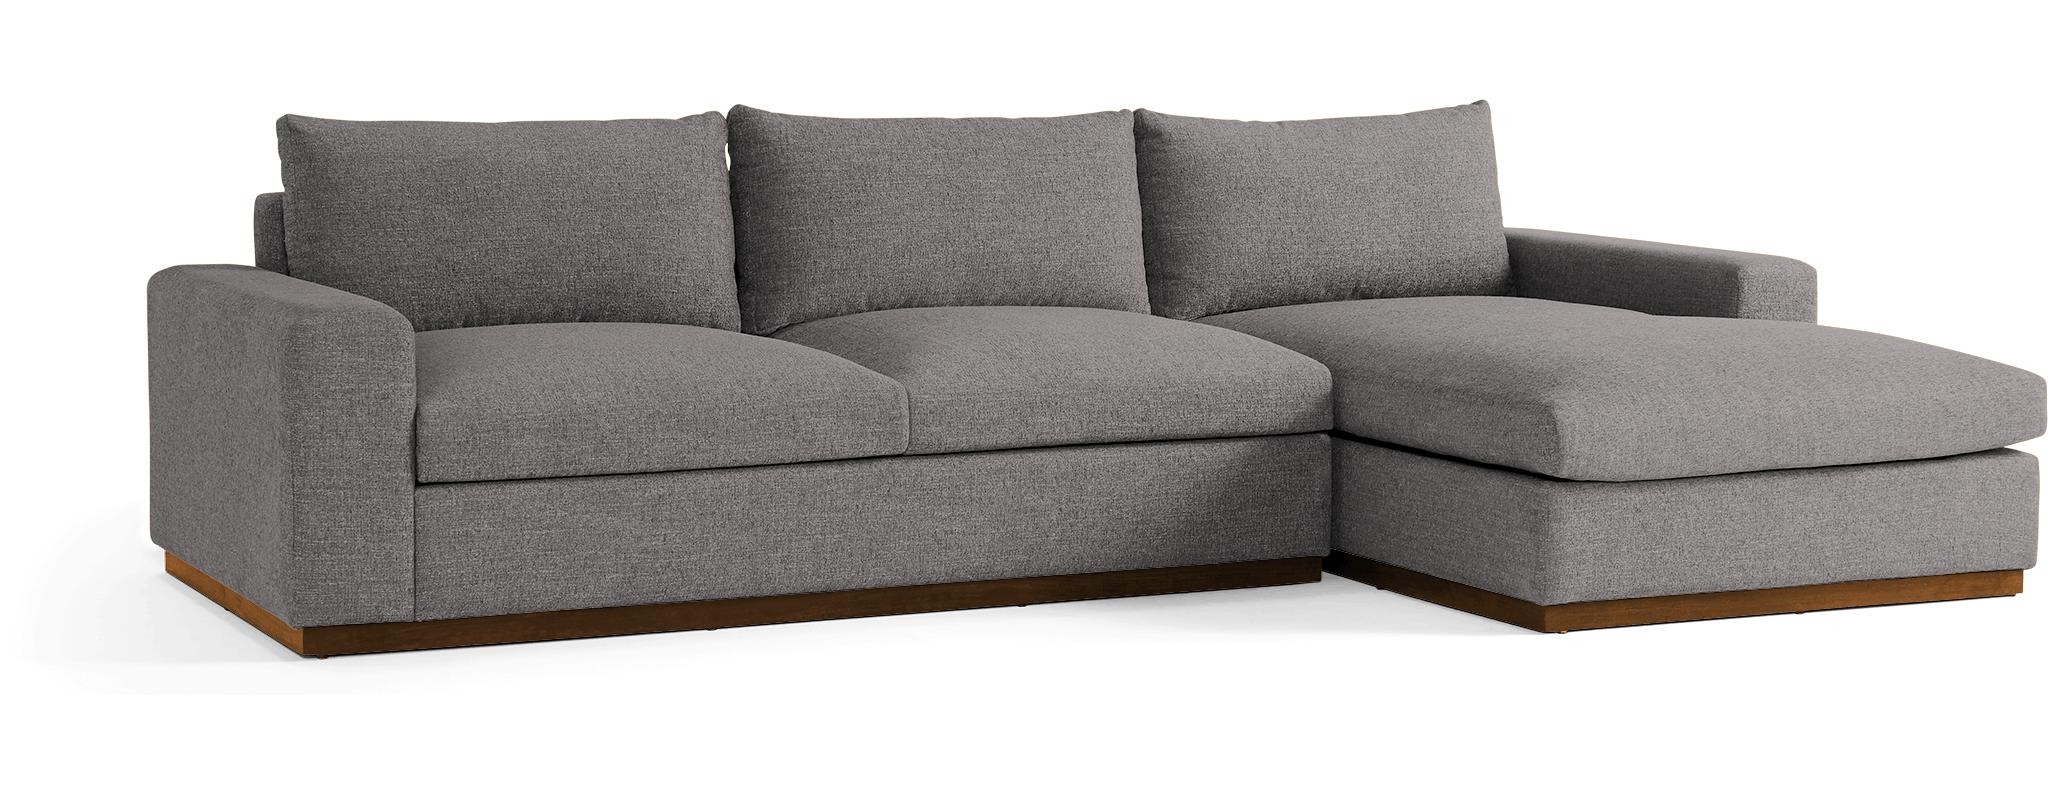 Gray Holt Mid Century Modern Sectional with Storage - Taylor Felt Grey - Mocha - Right - Image 3